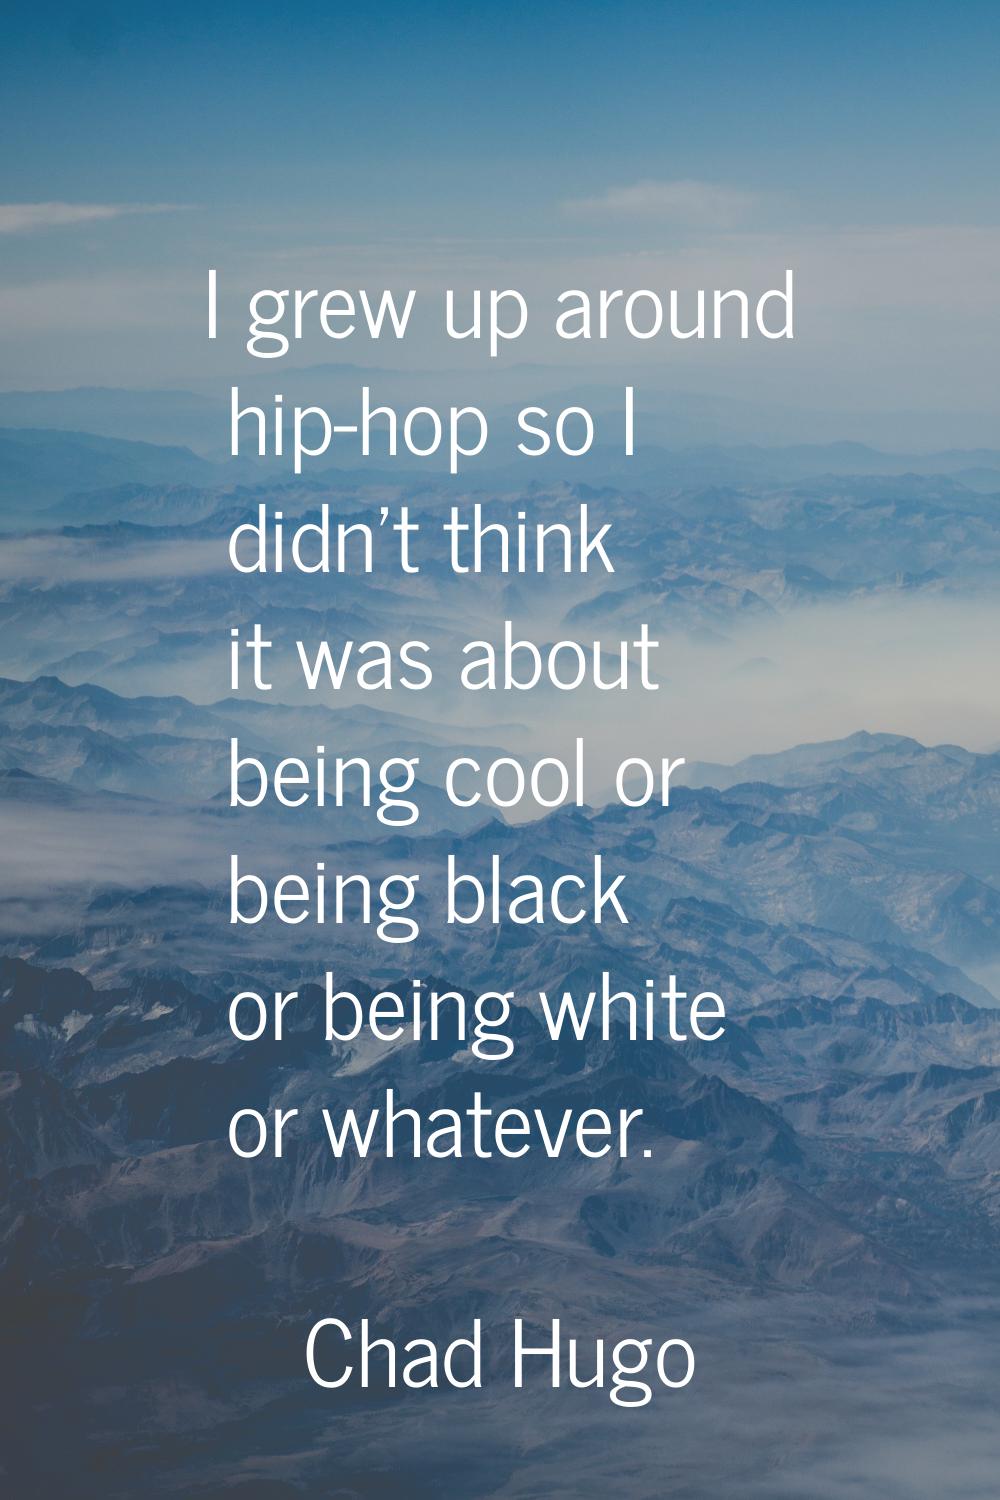 I grew up around hip-hop so I didn't think it was about being cool or being black or being white or